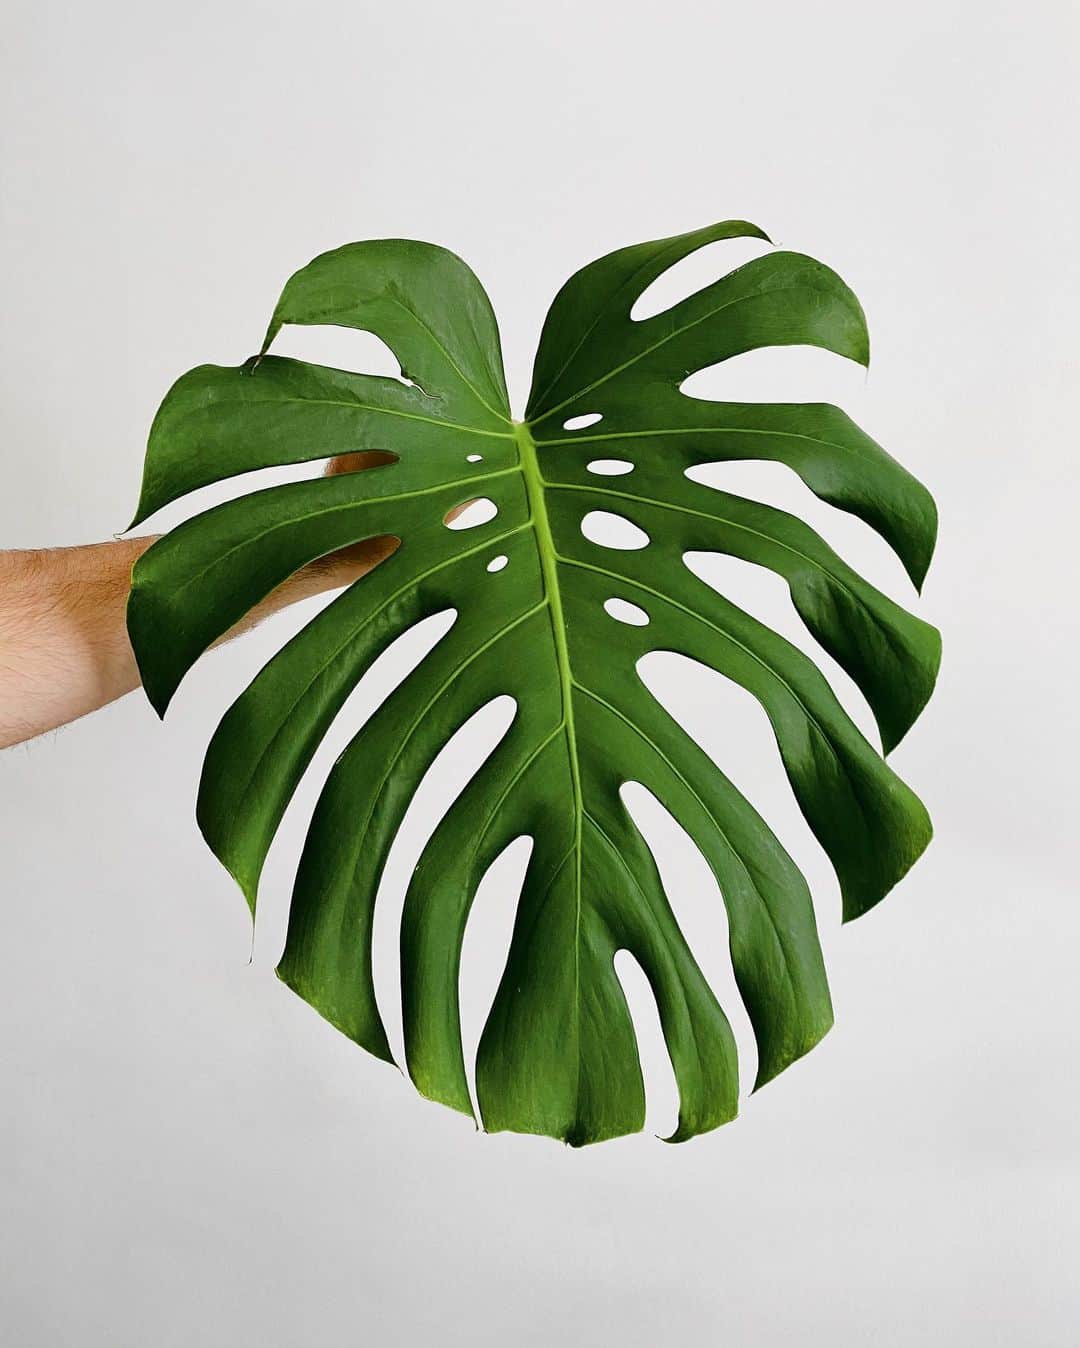 Cubby Grahamのインスタグラム：「Proud plant dad moment 🌿 - Our monstera, Lady Gaga, has been living her best life and gifting us with the most beautiful new leaves. It’s wild to imagine, but just 2 years ago we were adopting her and she was so little she fit in a brown paper bag. - They grow up so fast 💚」